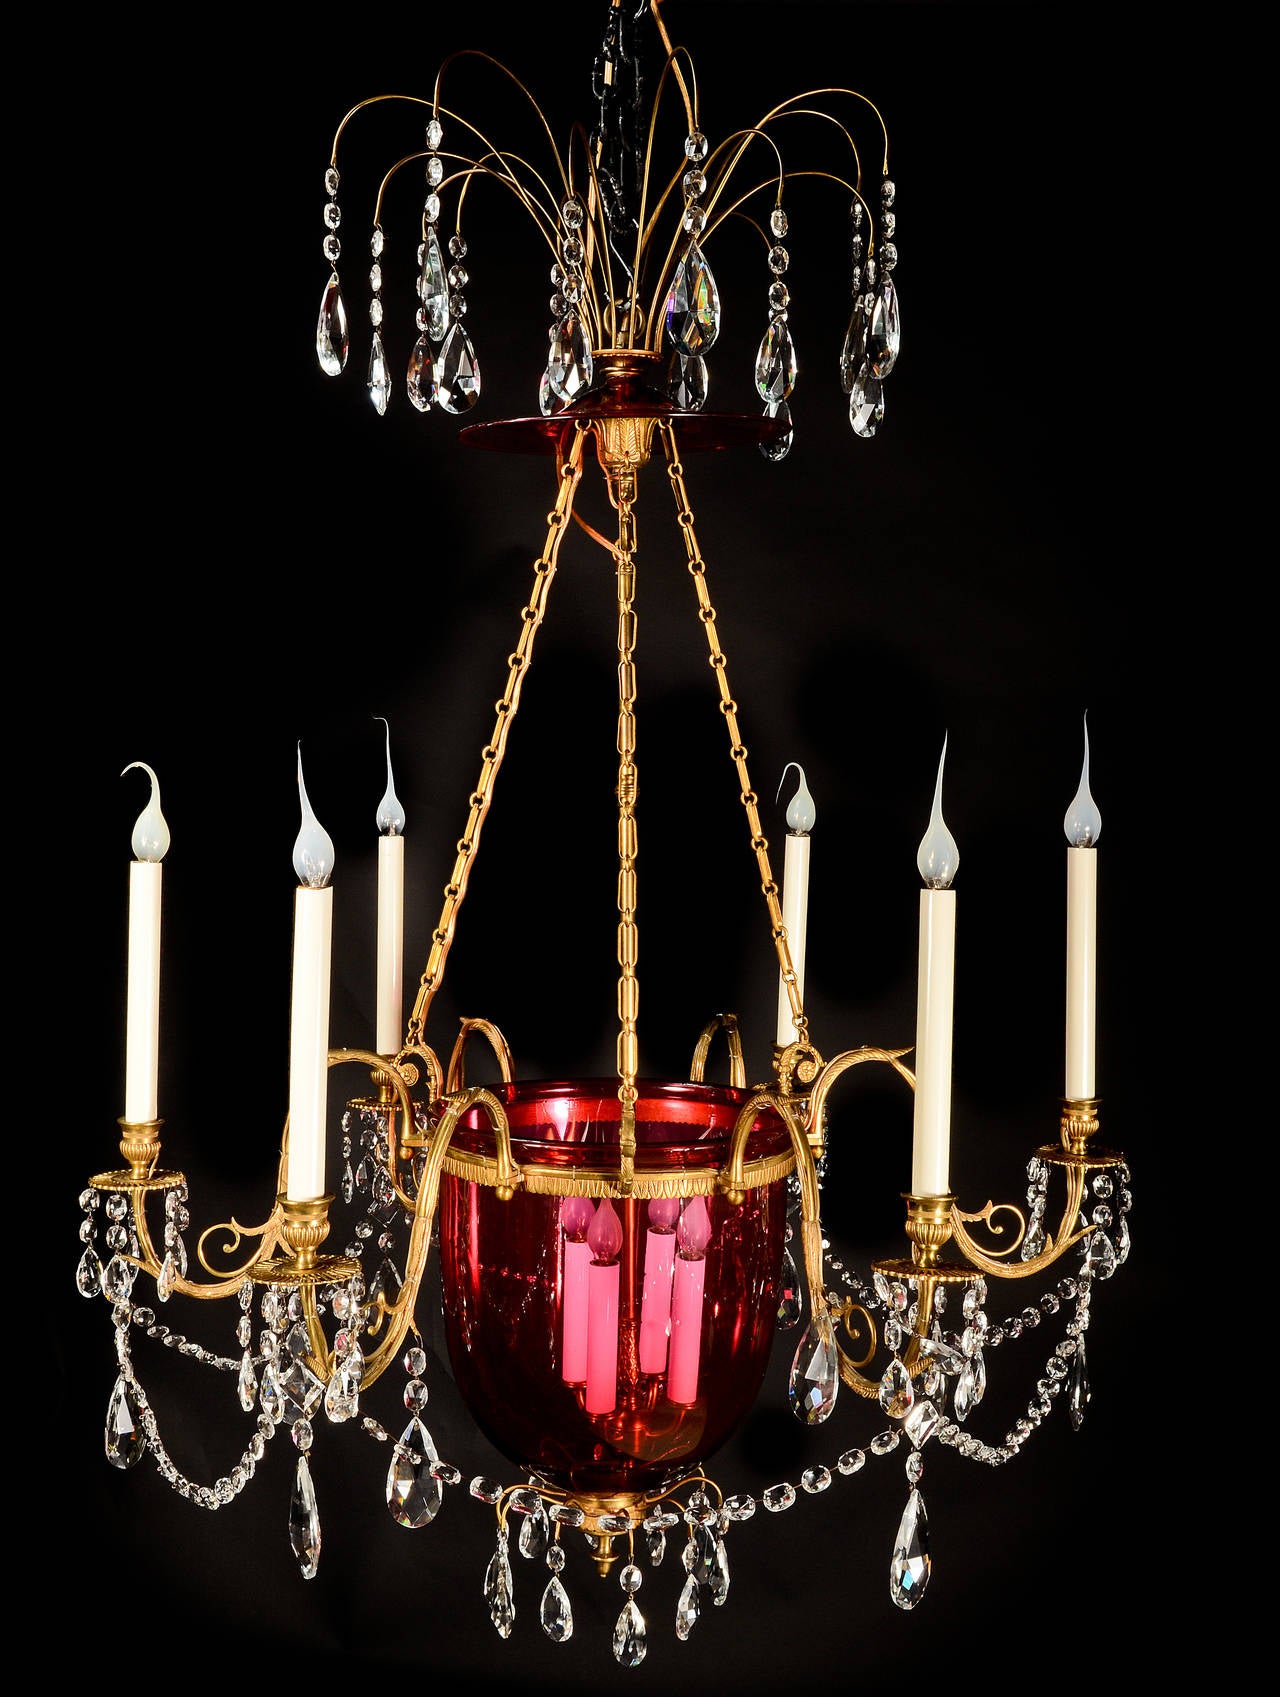 A fine antique Russian neoclassical gilt bronze, cut crystal and cranberry glass multi light lantern chandelier embellished with gilt bronze arms, central cranberry glass, cut crystal chains and prisms.